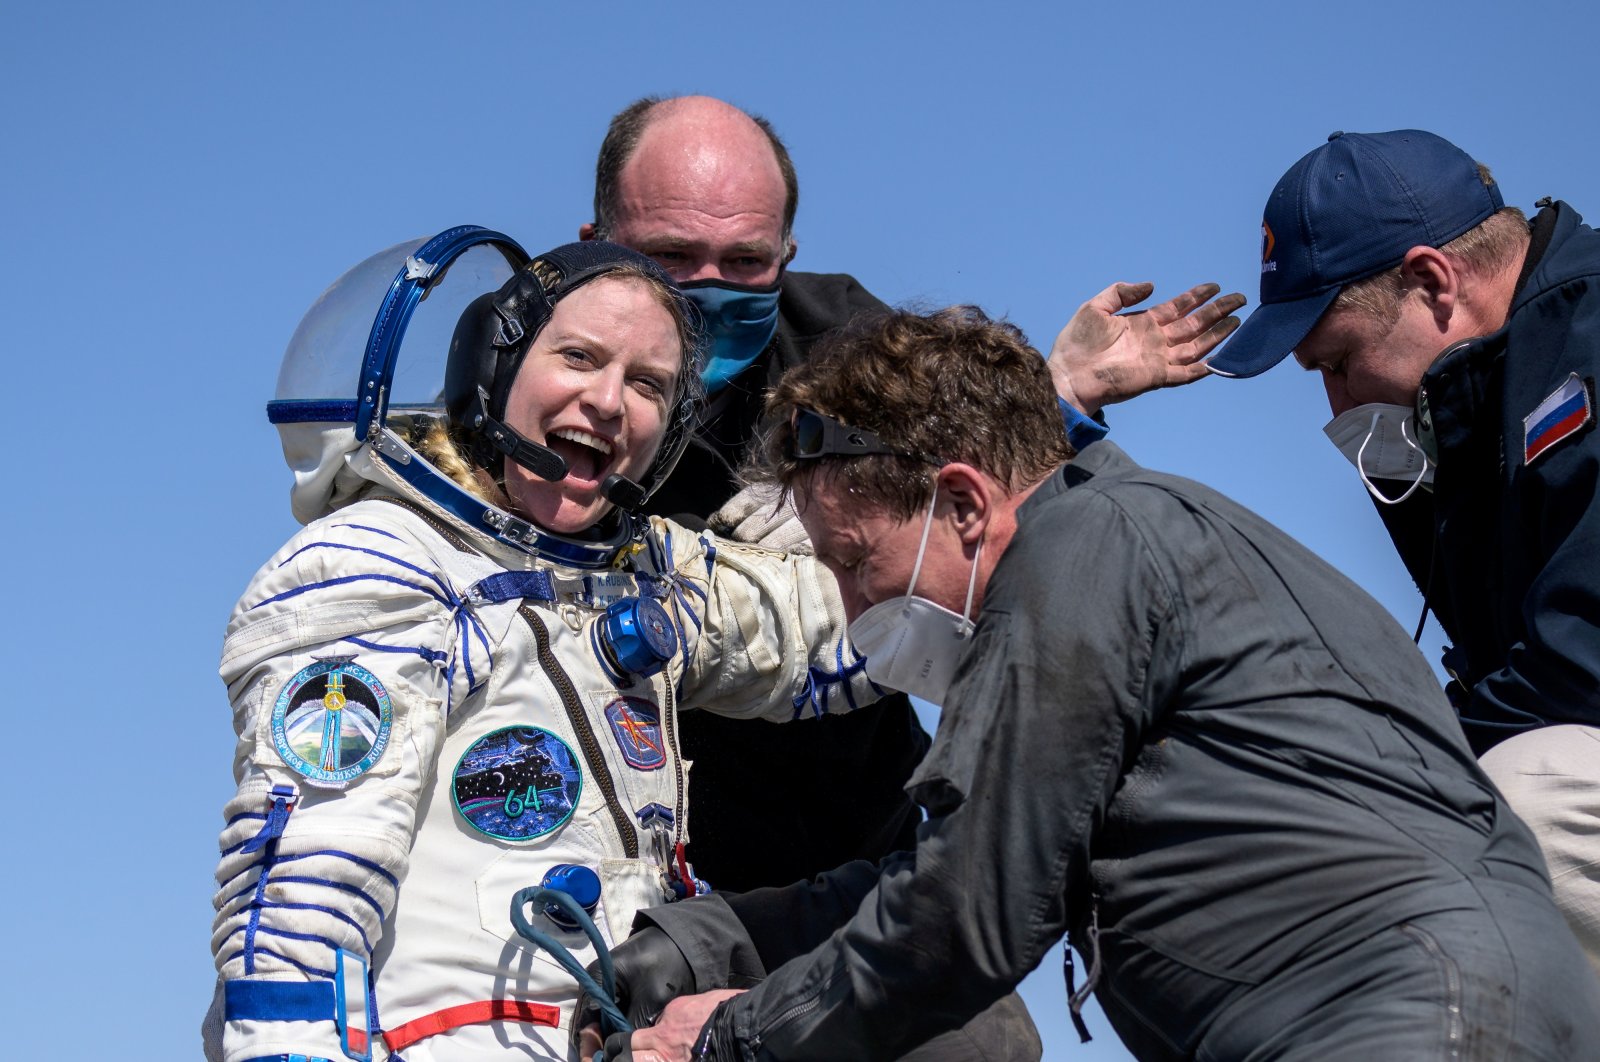 The International Space Station (ISS) crew member Kathleen Rubins of NASA reacts shortly after the landing of the Soyuz MS-17 space capsule in a remote area outside Zhezkazgan, Kazakhstan, April 17, 2021. (NASA/Bill Ingalls/via Reuters)